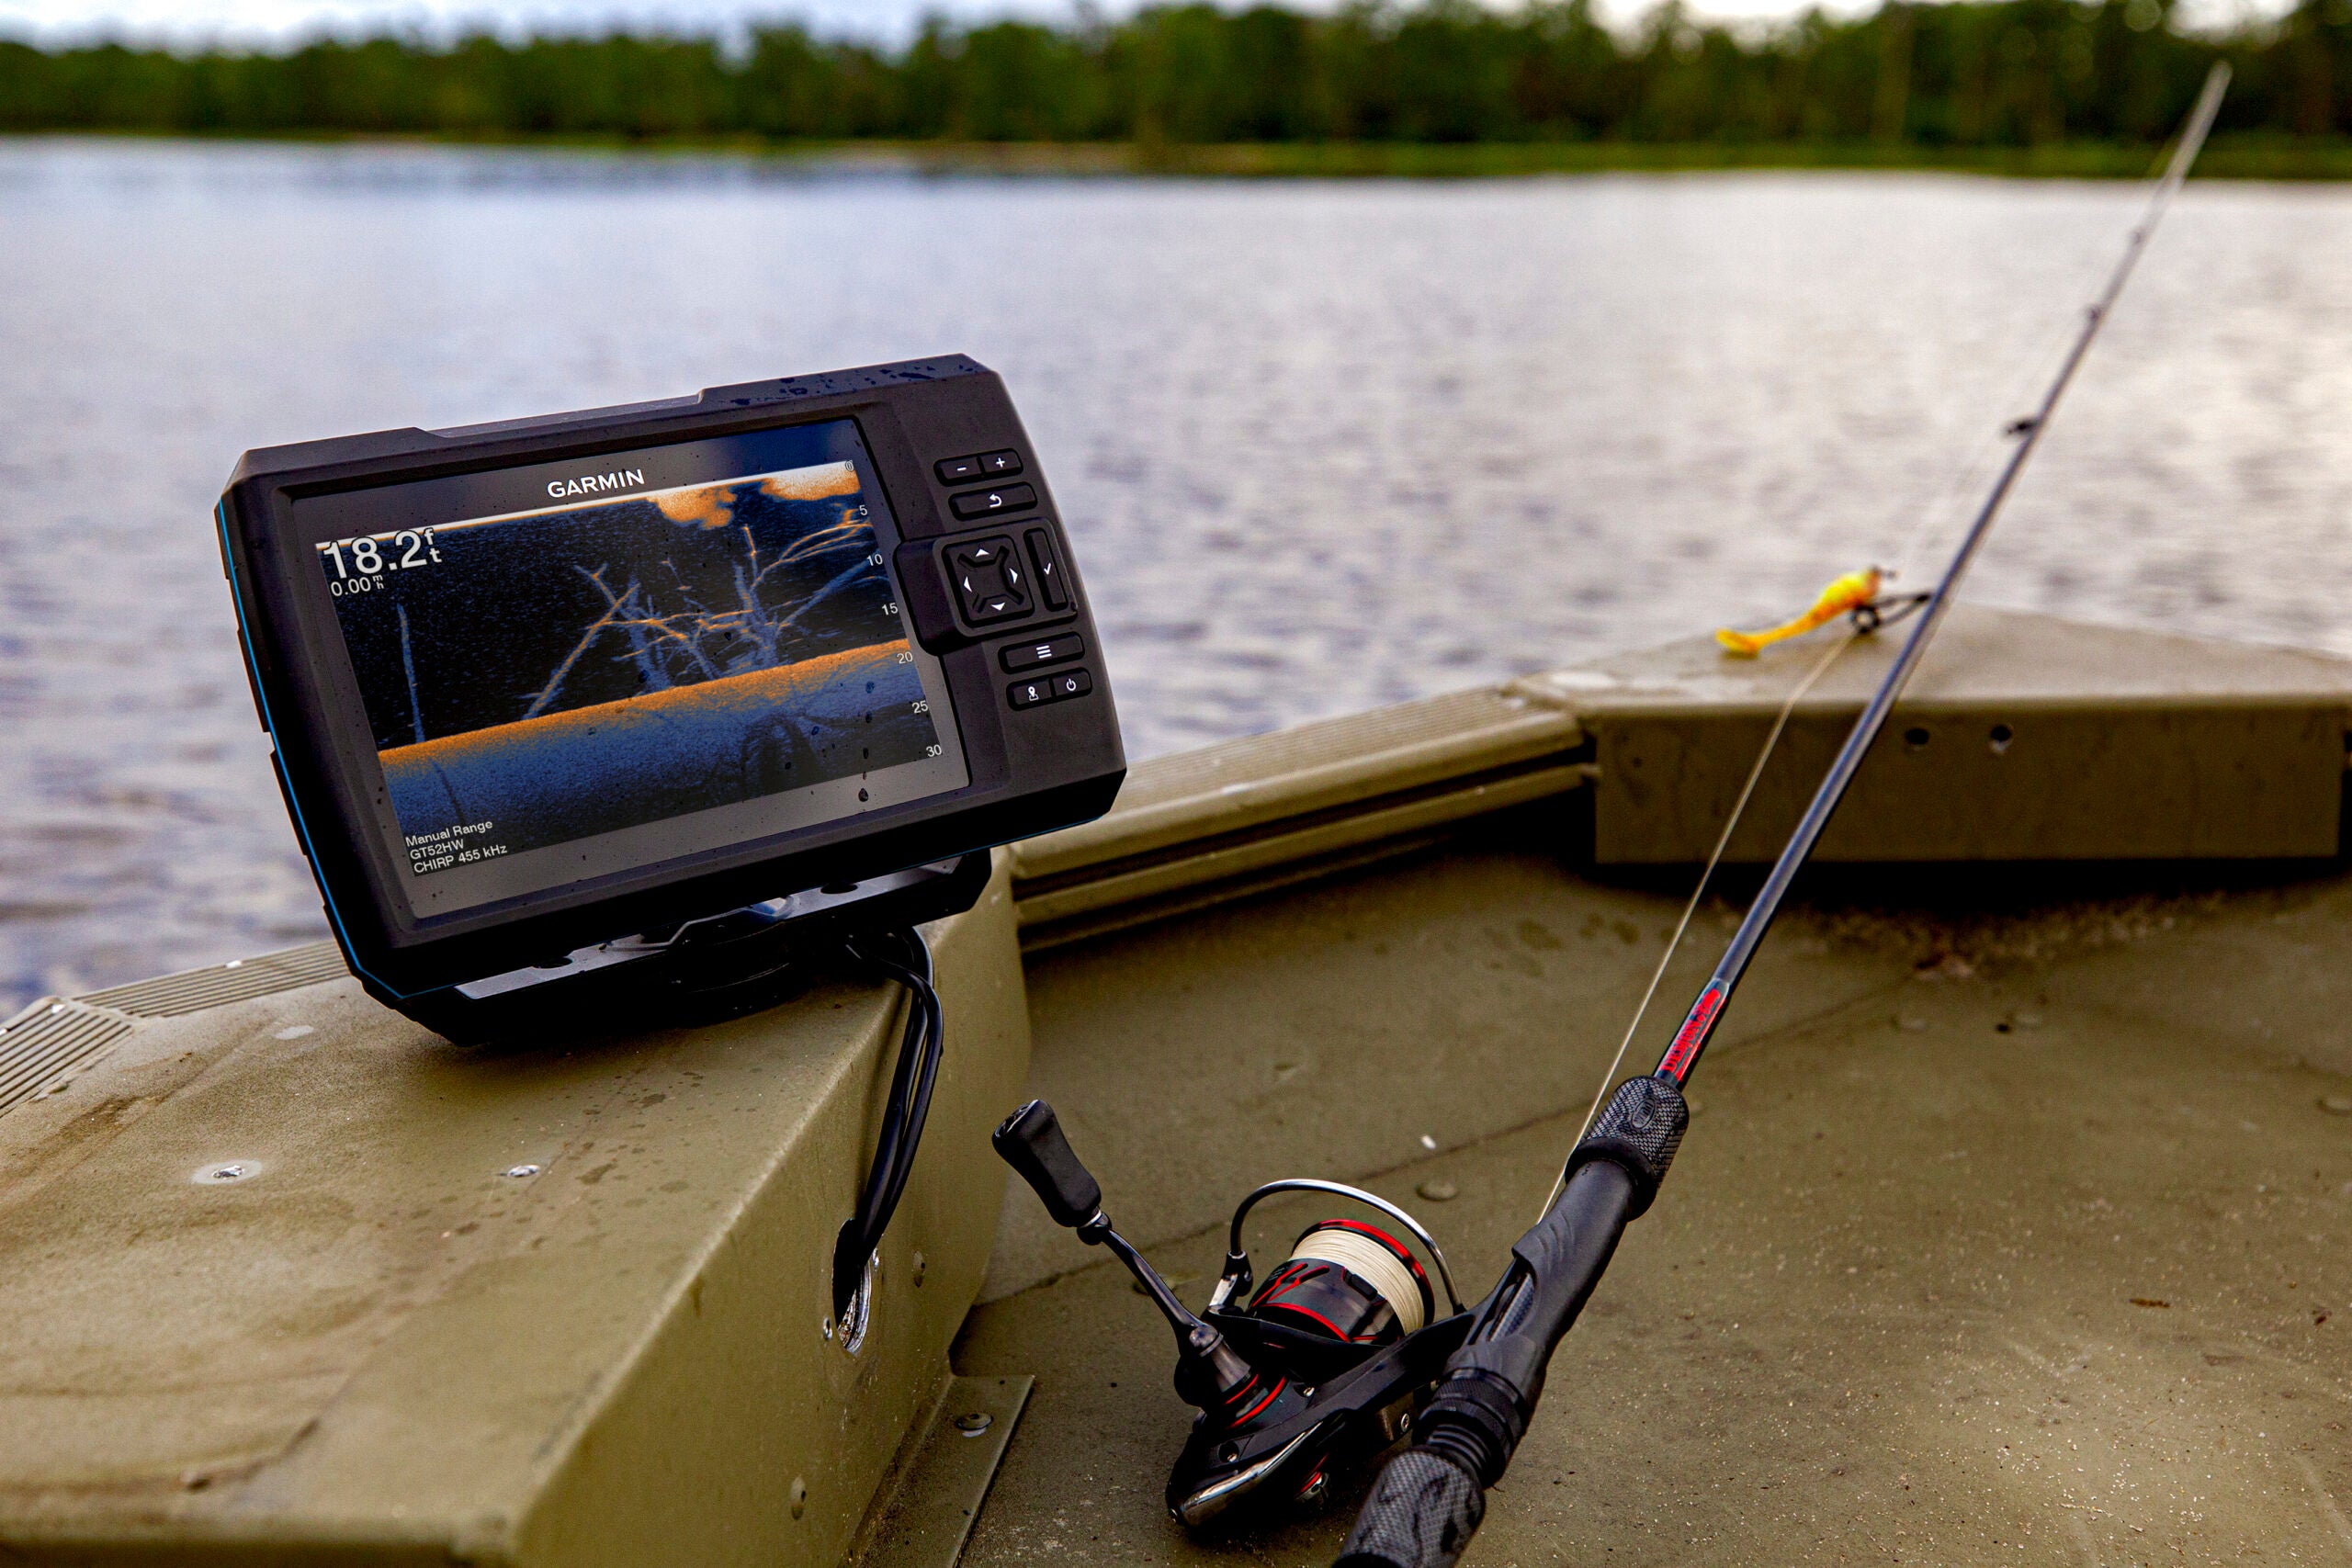 Garmin Striker 4 Fish Finder The Ultimate Guide and Instruction Tutorial 